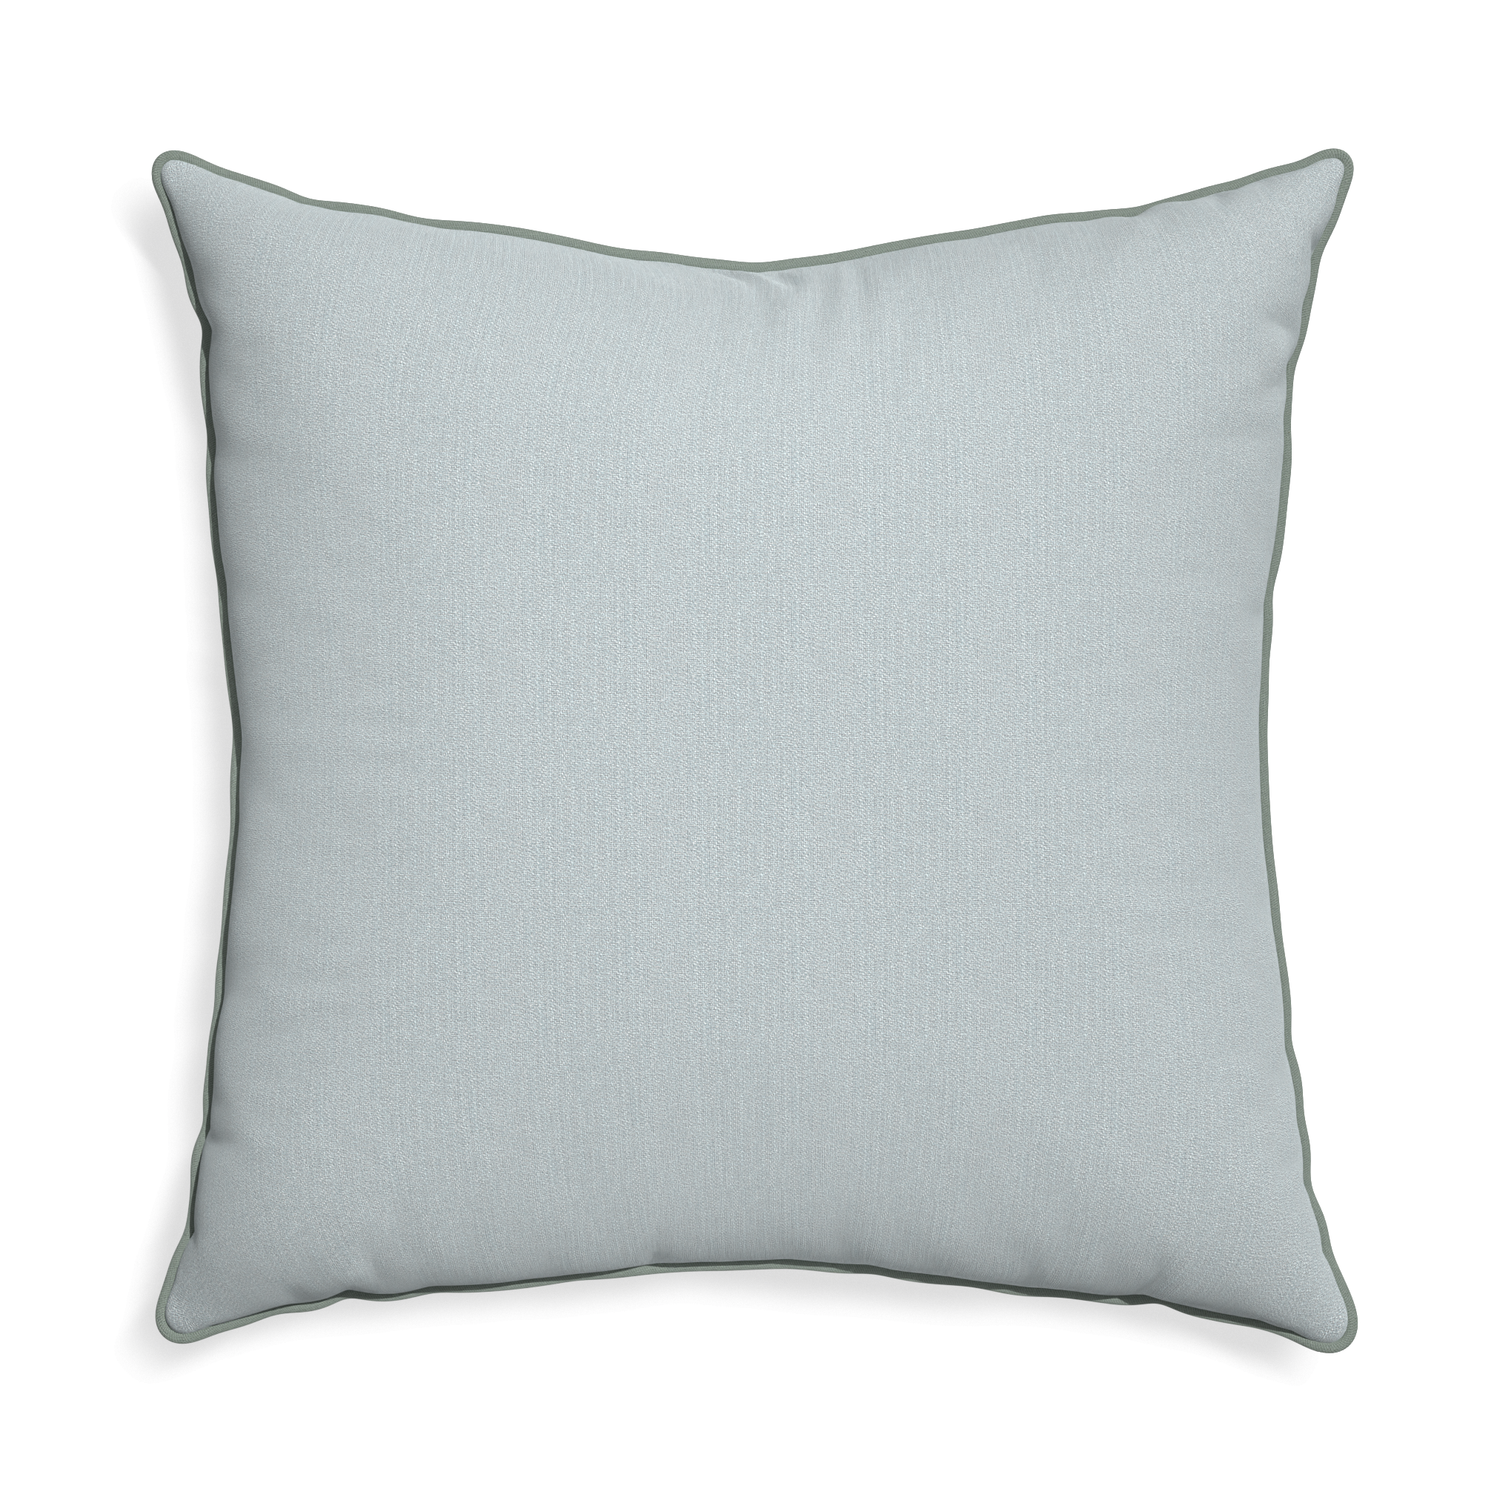 Euro-sham sea custom grey bluepillow with sage piping on white background